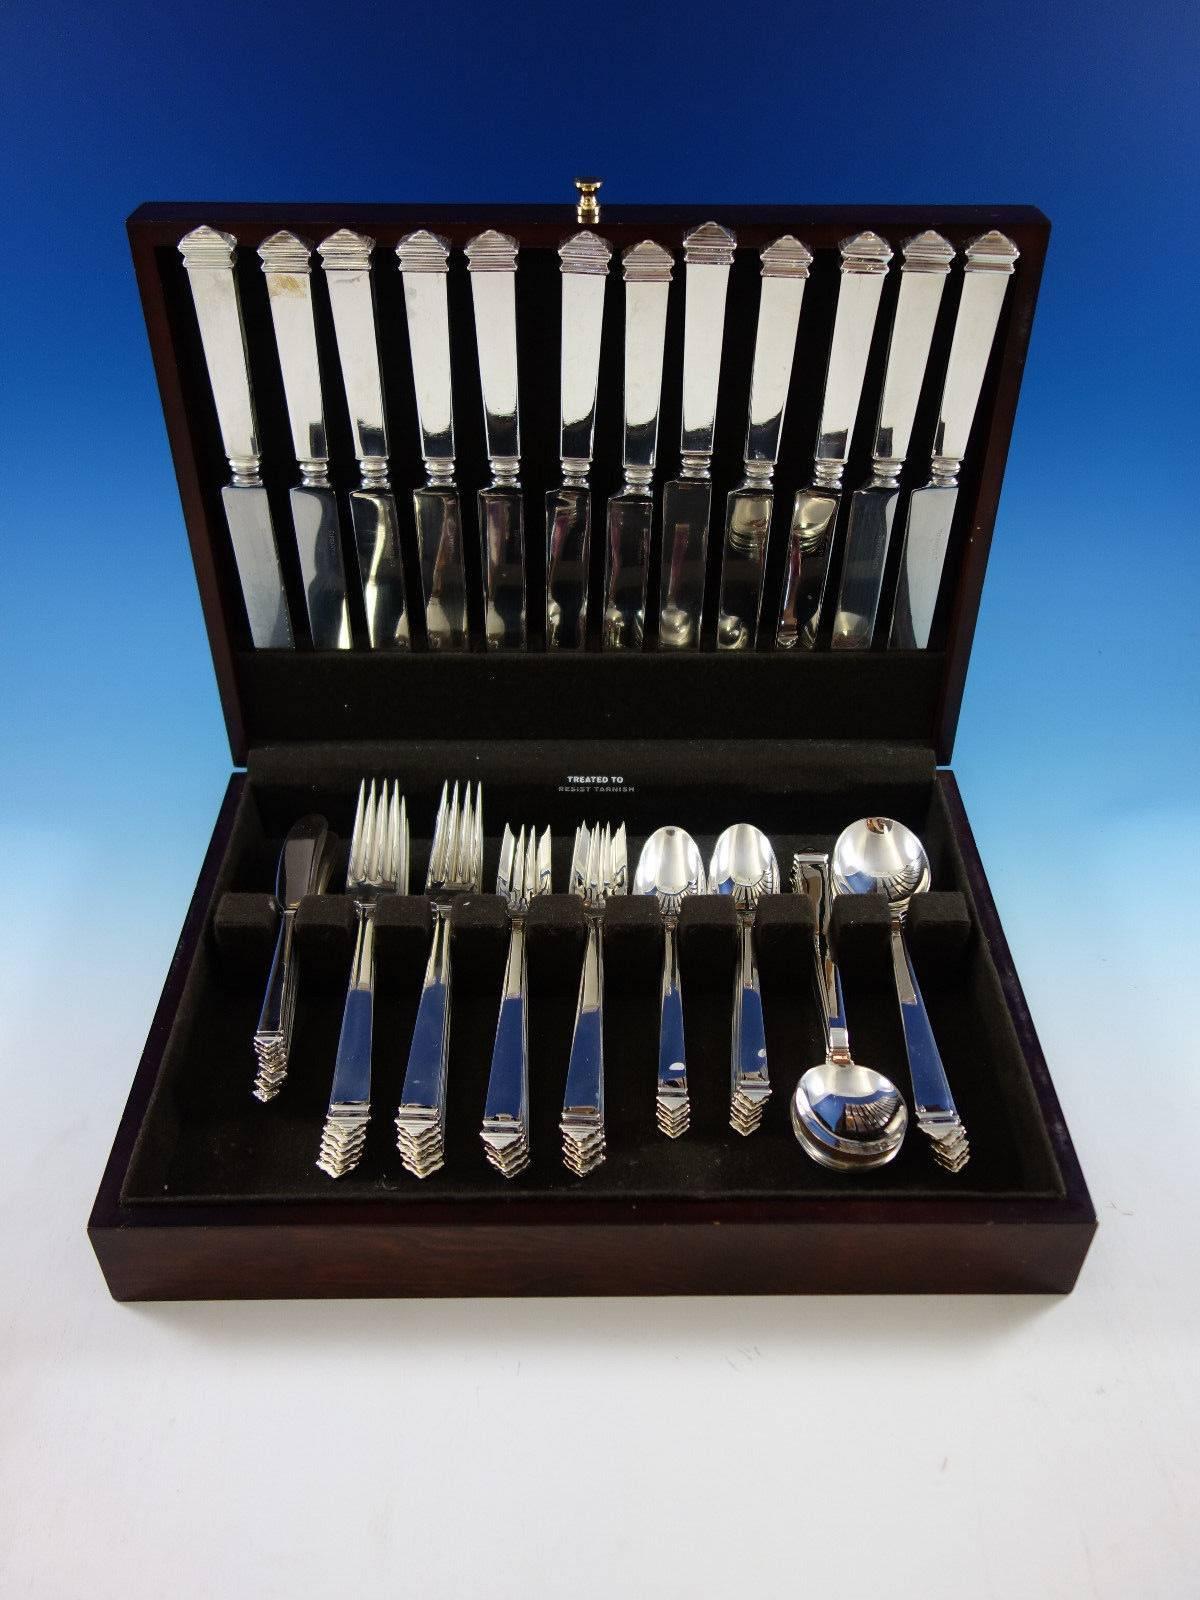 Hampton by Tiffany and Co. sterling silver dinner size flatware set, 72 pieces. this set includes: 12 dinner size knives, 10 1/8", 12 dinner size forks, 7 3/4", 12 salad forks, 6 7/8", 12 teaspoons, 6", 12 cream soup spoons,